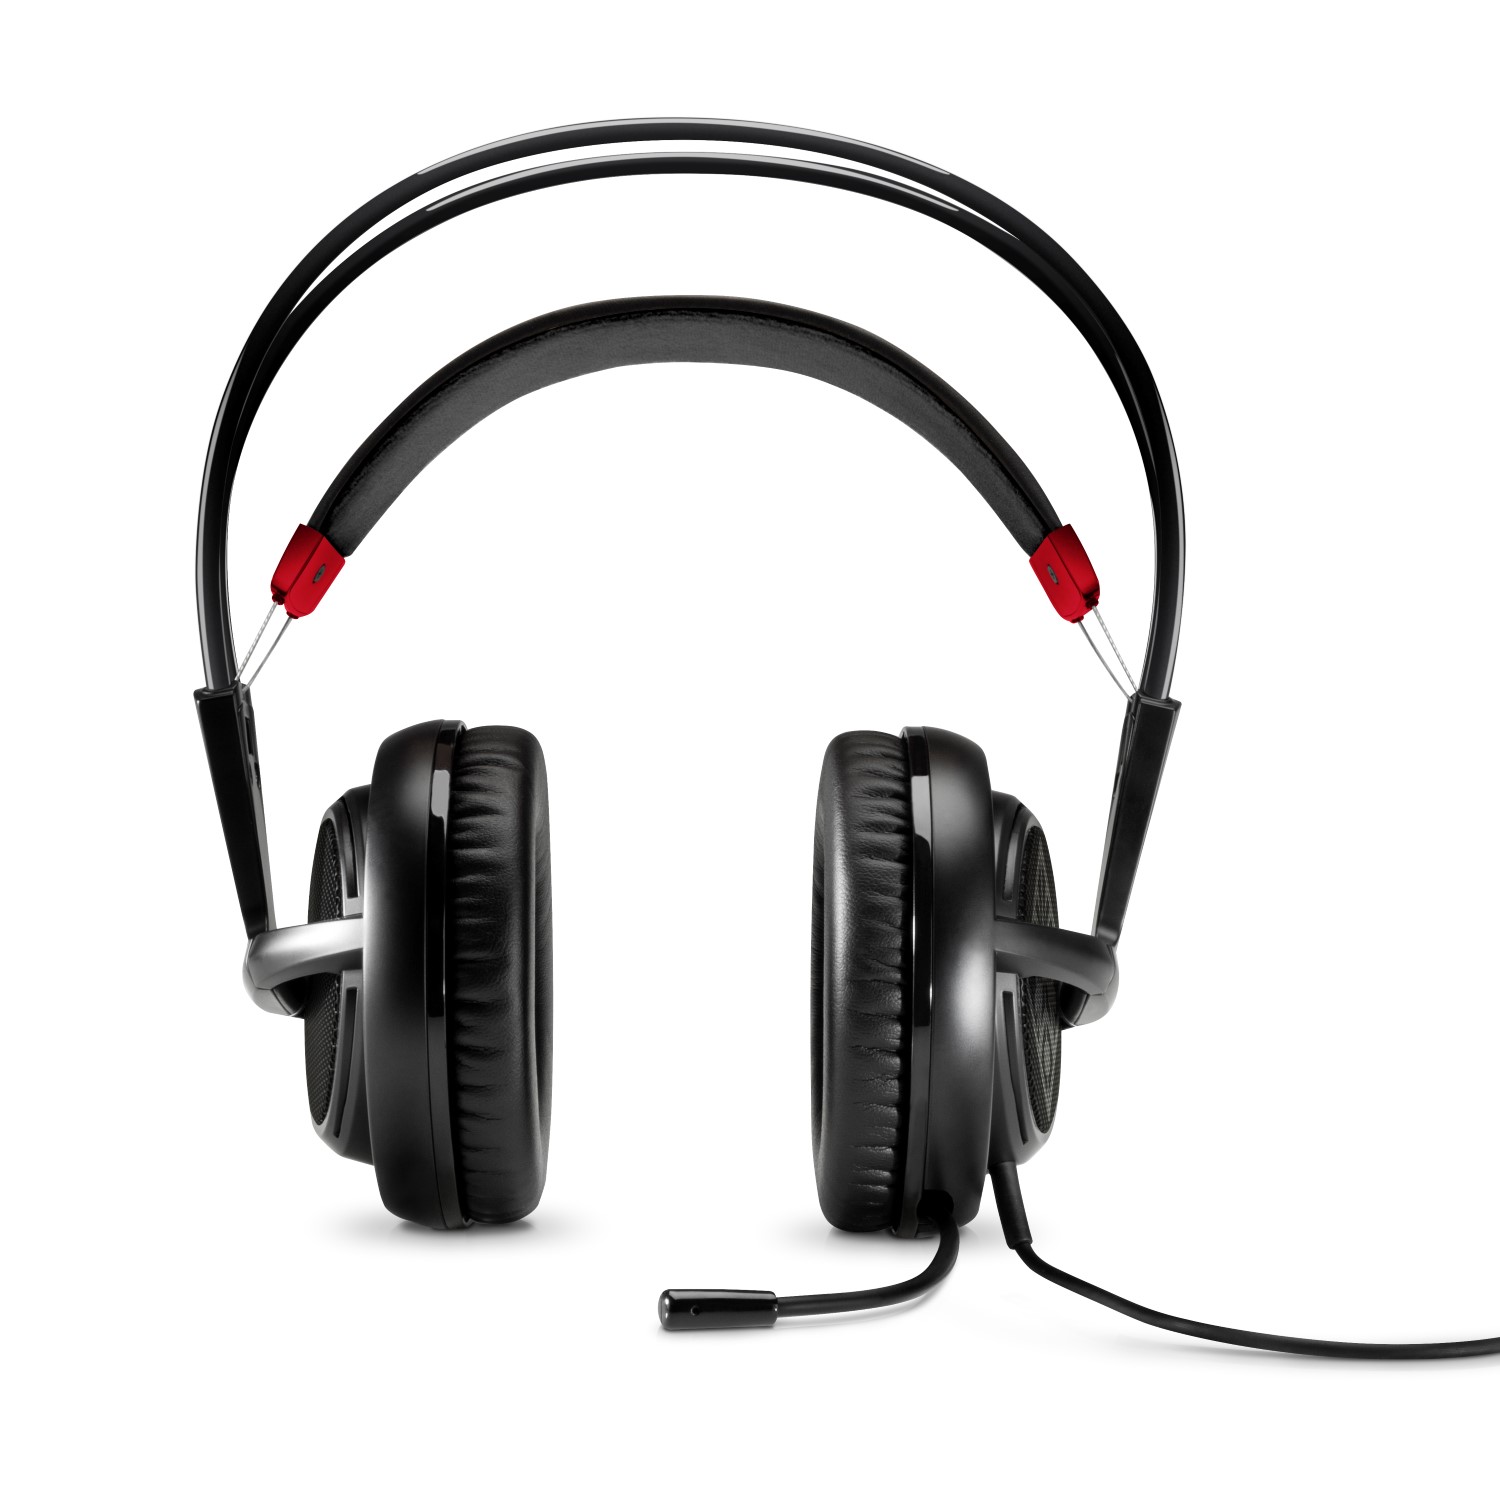 HP OMEN Gaming Headset with SteelSeries